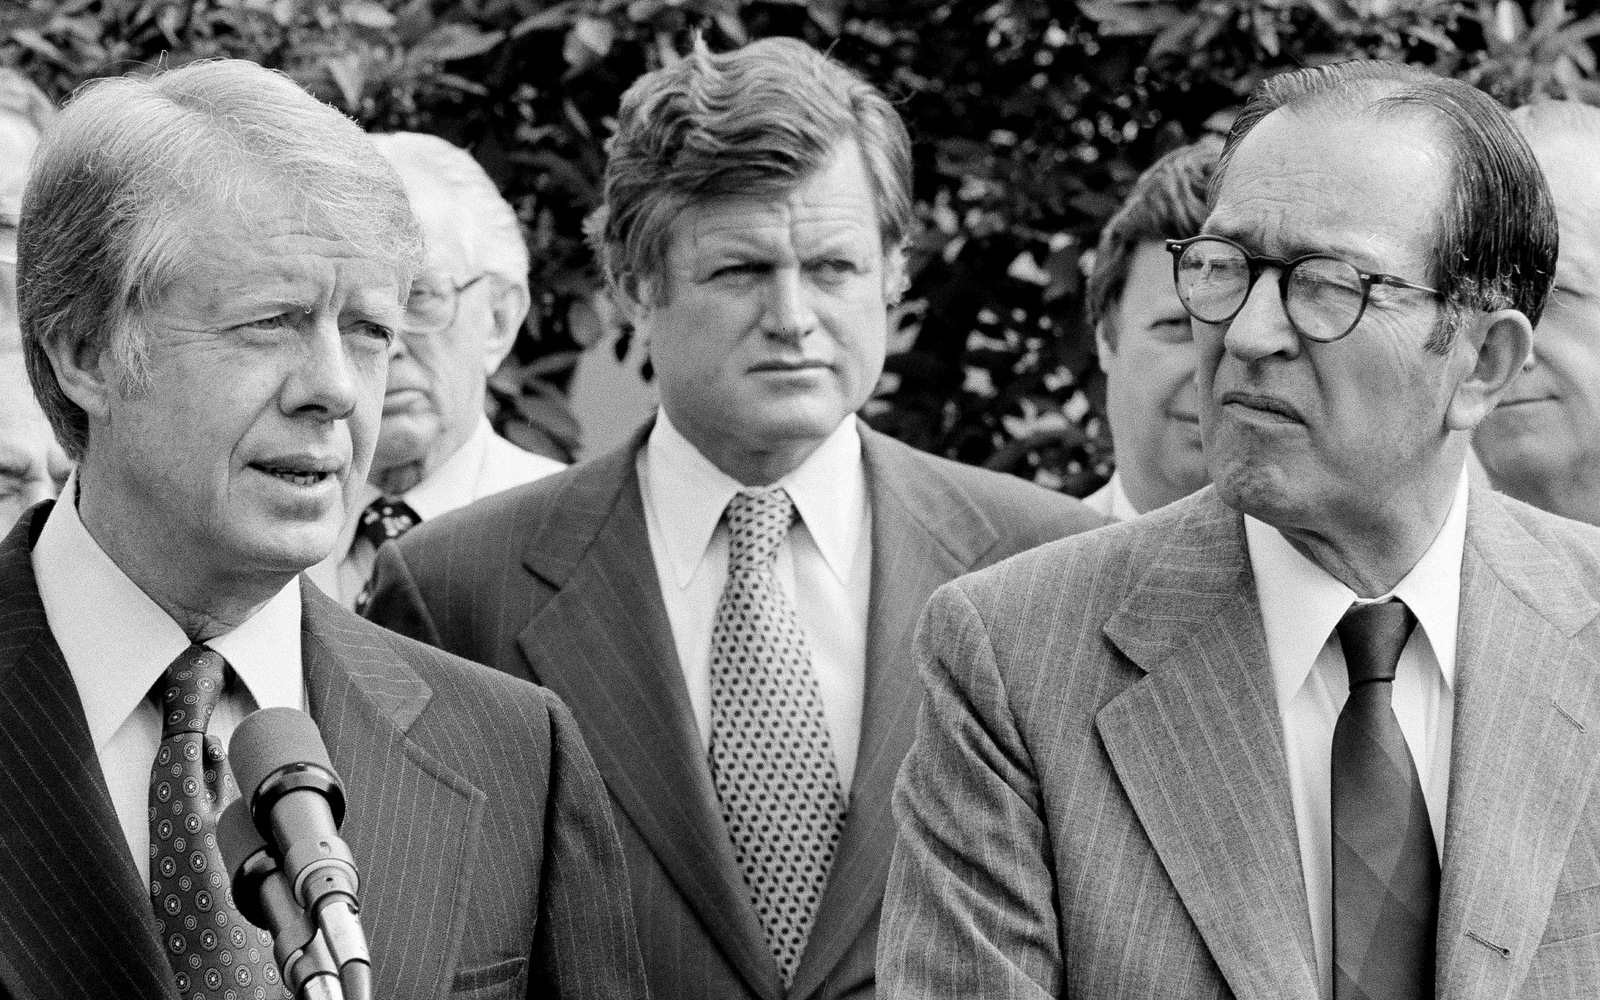 President Jimmy Carter announces the Foreign Intelligence Surveillance Act of 1977 in the White House Rose Garden, May 17, 1977. The act was sold as keeping the government from illegally spying on citizens. Standing behind Carter is Sen. Edward M. Kennedy (D-Mass.), one of the sponsors of the bill, with Attorney General Griffin Bell at right. (AP/Bob Daugherty)President Jimmy Carter announces the Foreign Intelligence Surveillance Act of 1977 in the White House Rose Garden, May 17, 1977. The act was sold as keeping the government from illegally spying on citizens. Standing behind Carter is Sen. Edward M. Kennedy (D-Mass.), one of the sponsors of the bill, with Attorney General Griffin Bell at right. (AP/Bob Daugherty)